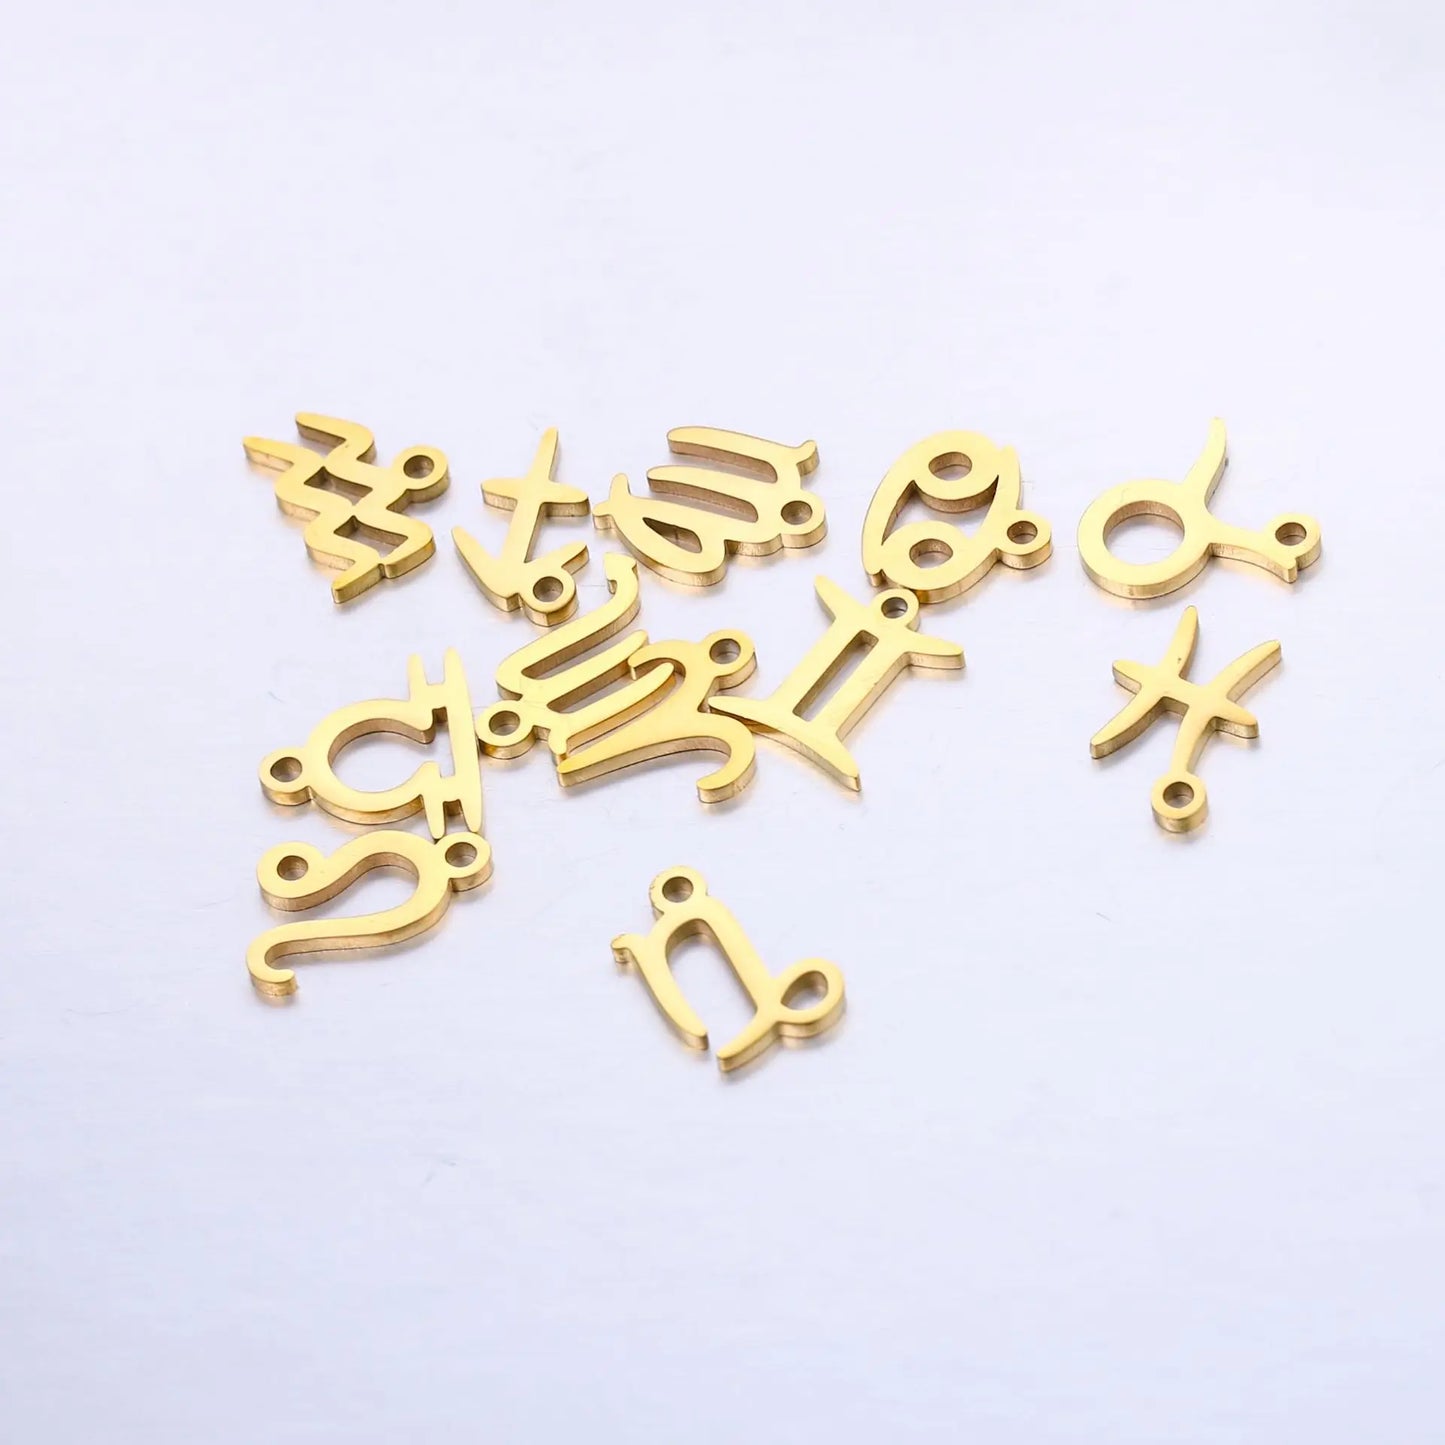 12pcs/lot 9.5*9.5mm Mirror Polished Stainless Steel Zodiac Charms Constellations Charms For DIY Bracelet Making